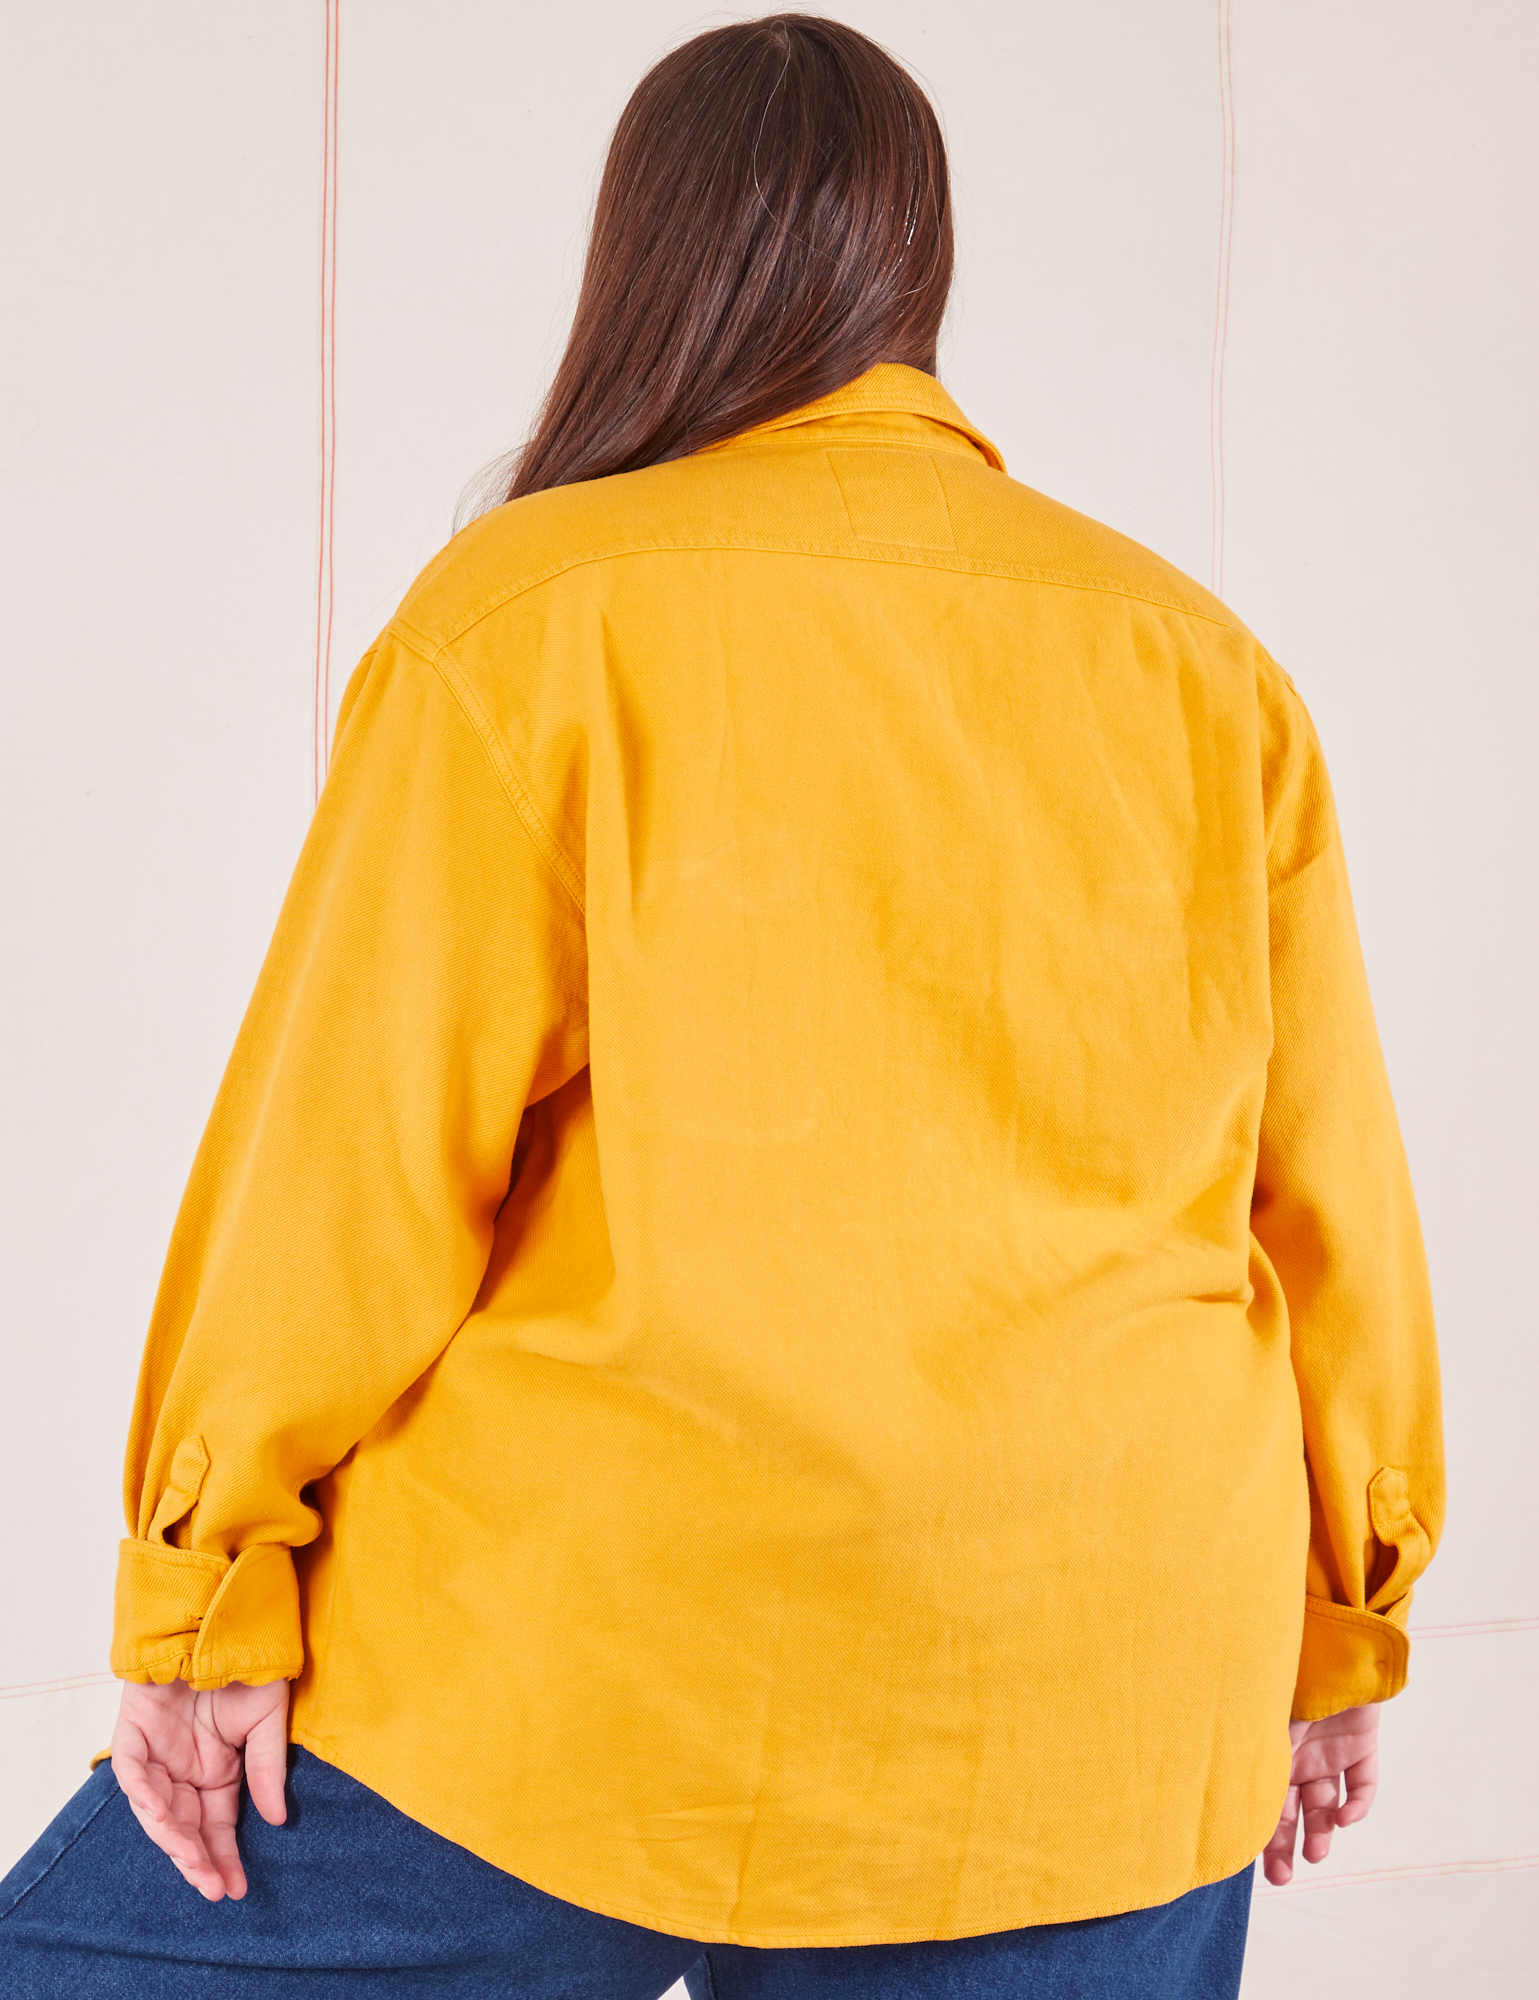 Back view of Flannel Overshirt in Mustard Yellow on Marielena